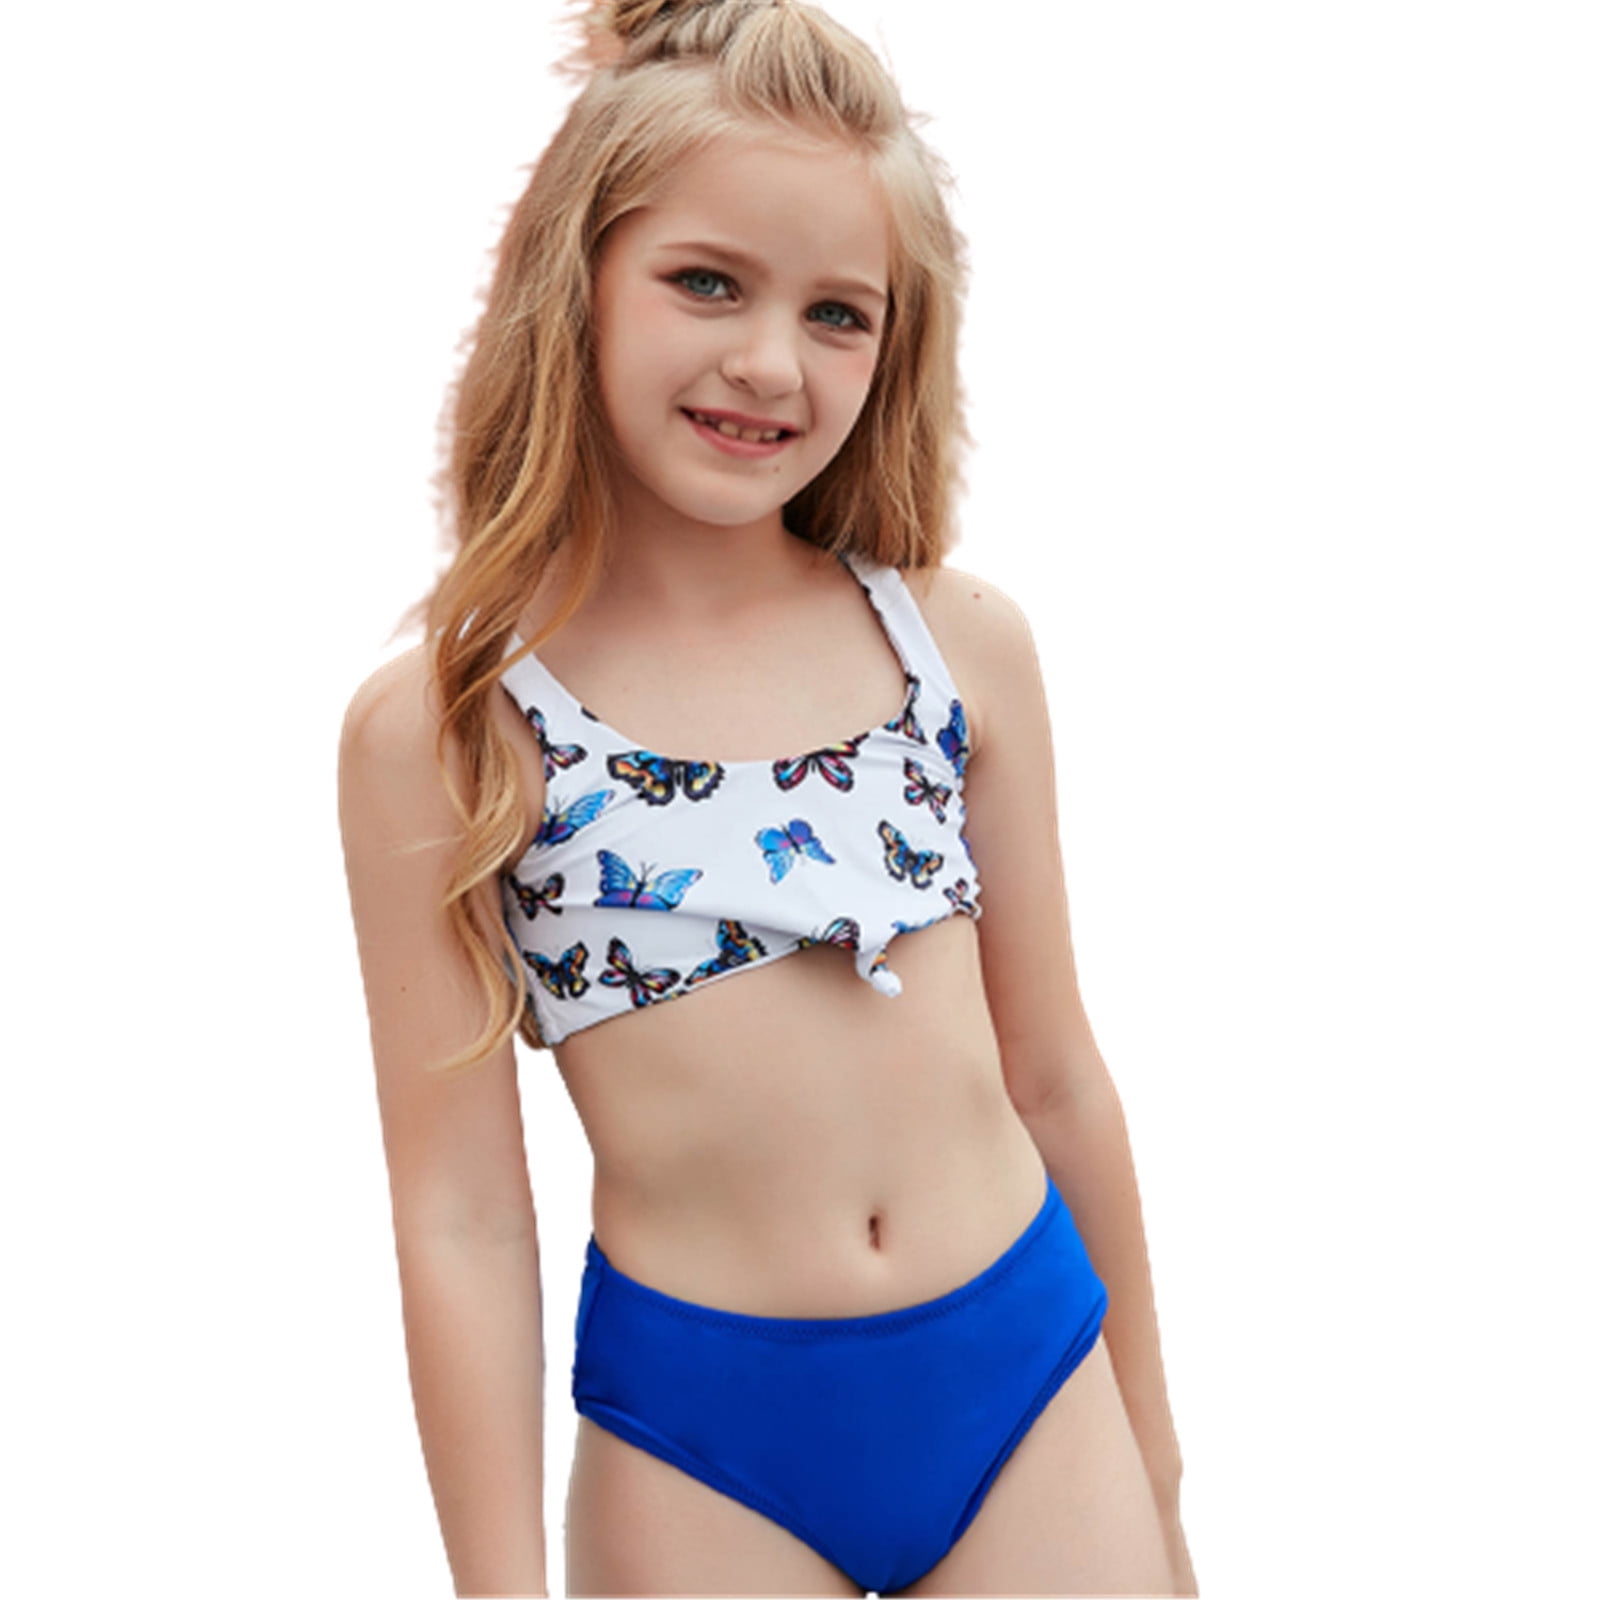 Leaf Printed Two Piece Best Swimsuits For Kids And Teens 5 14